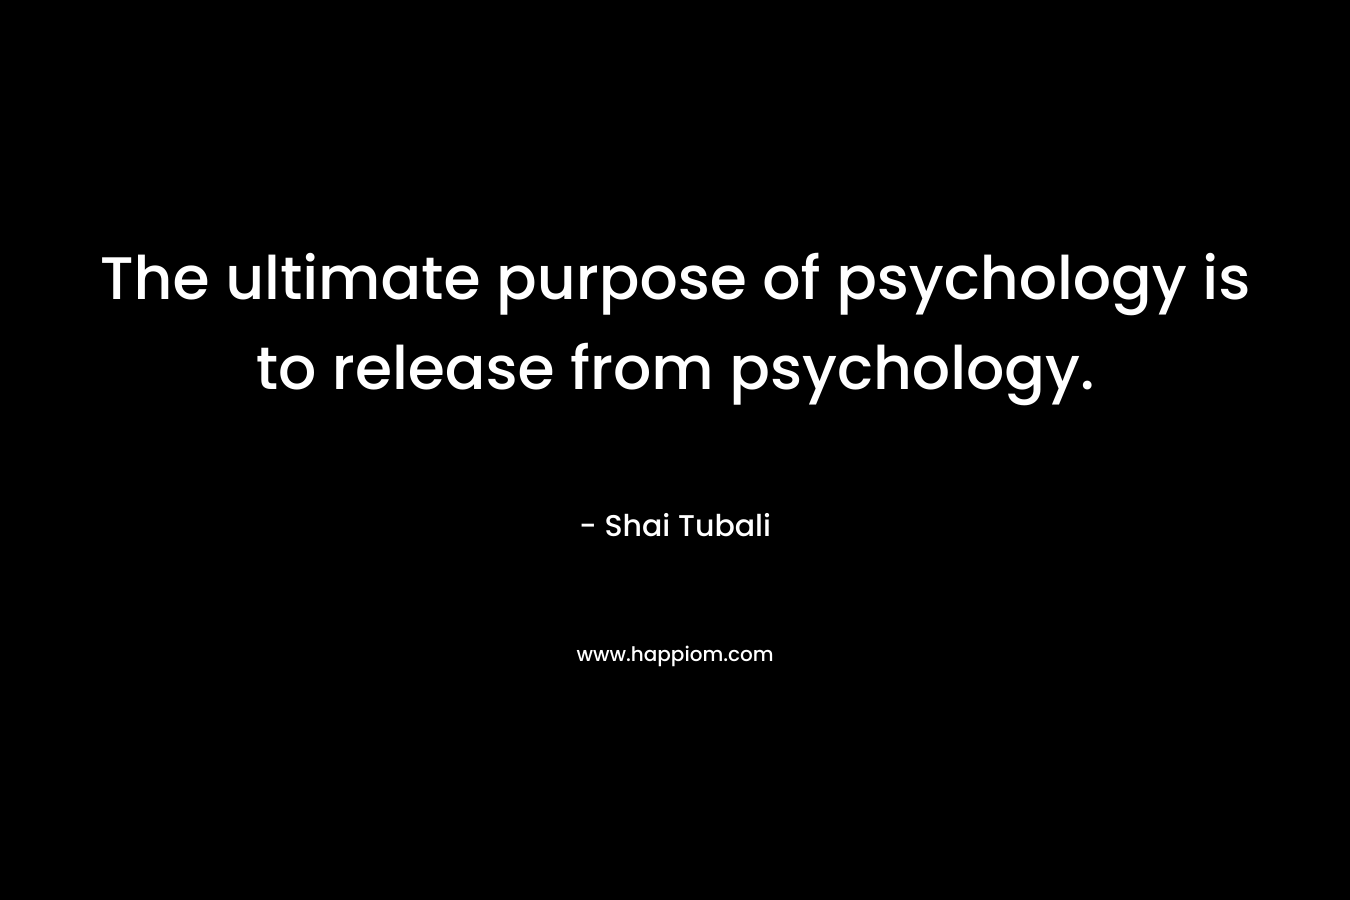 The ultimate purpose of psychology is to release from psychology.